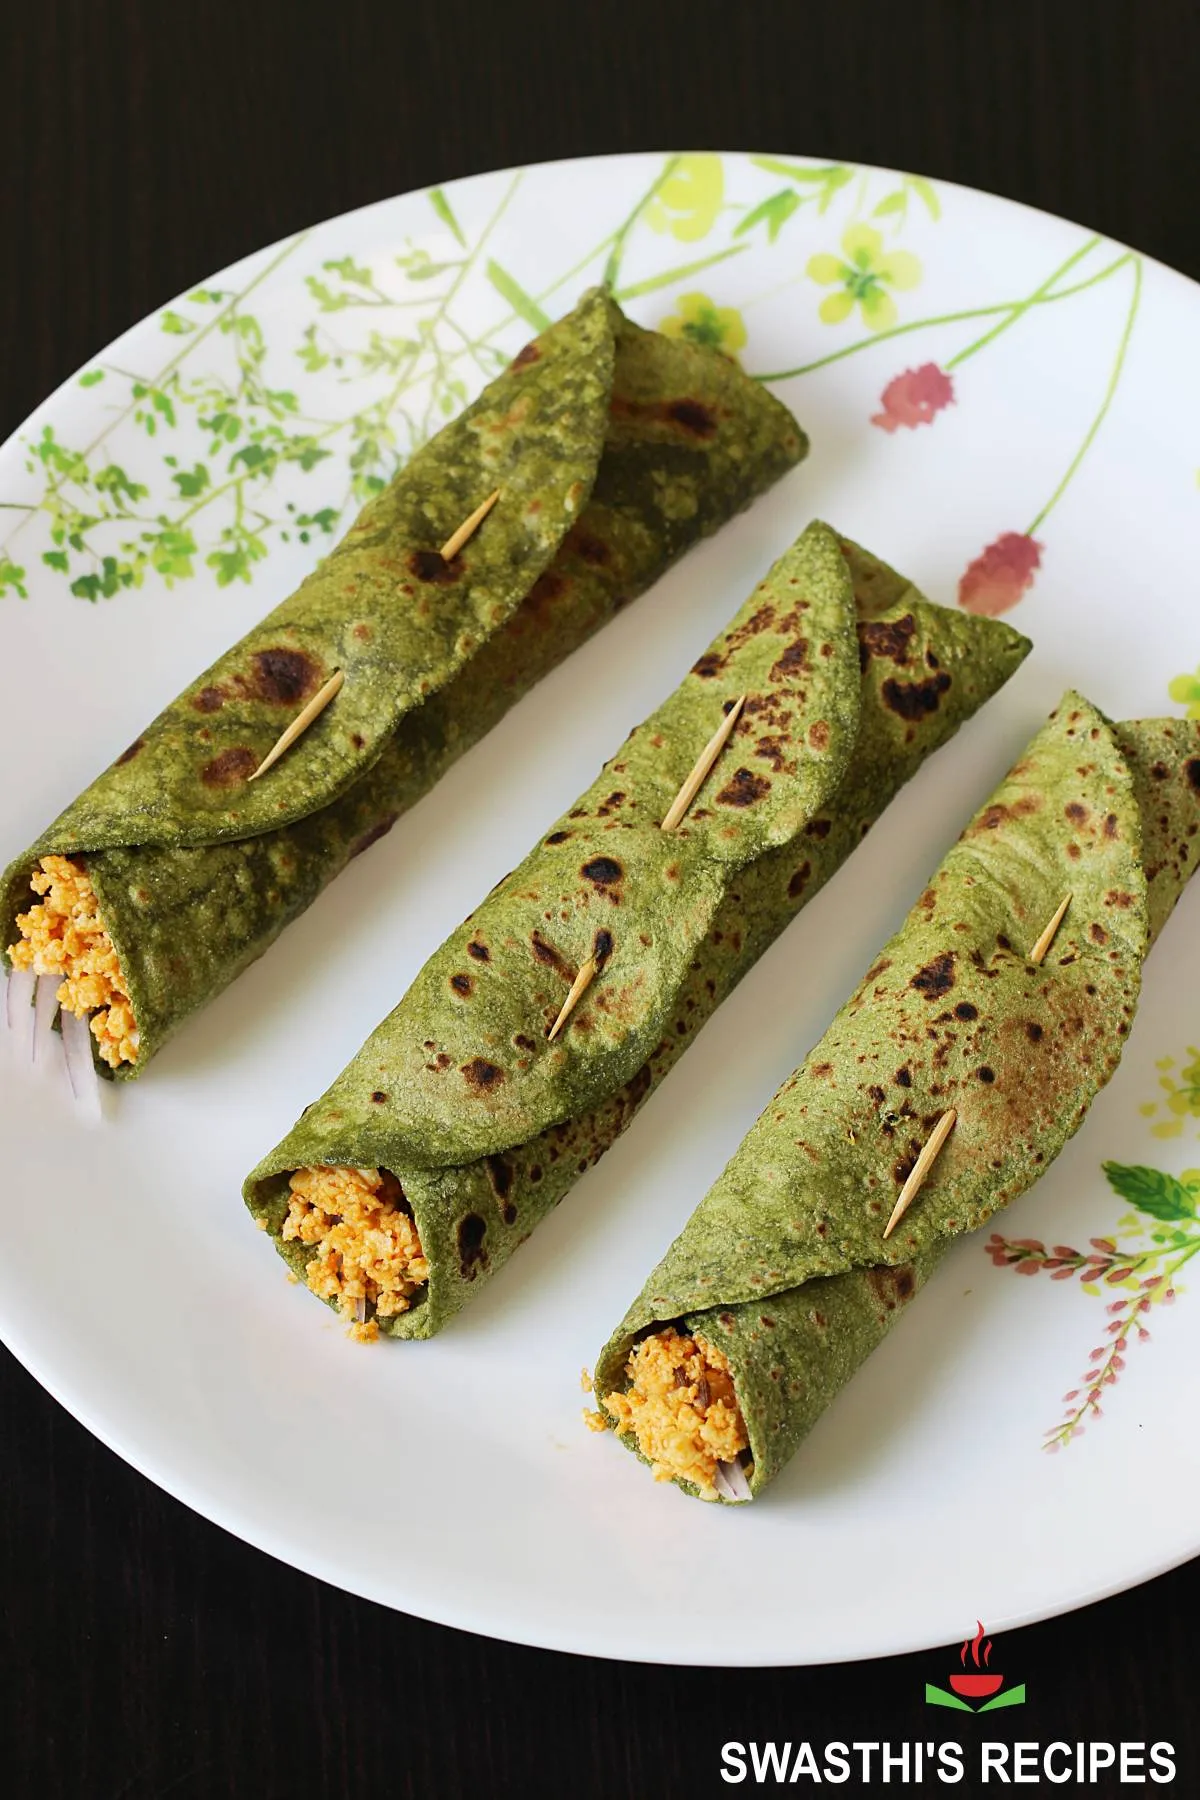 Spinach wrap with Indian cheese stuffing